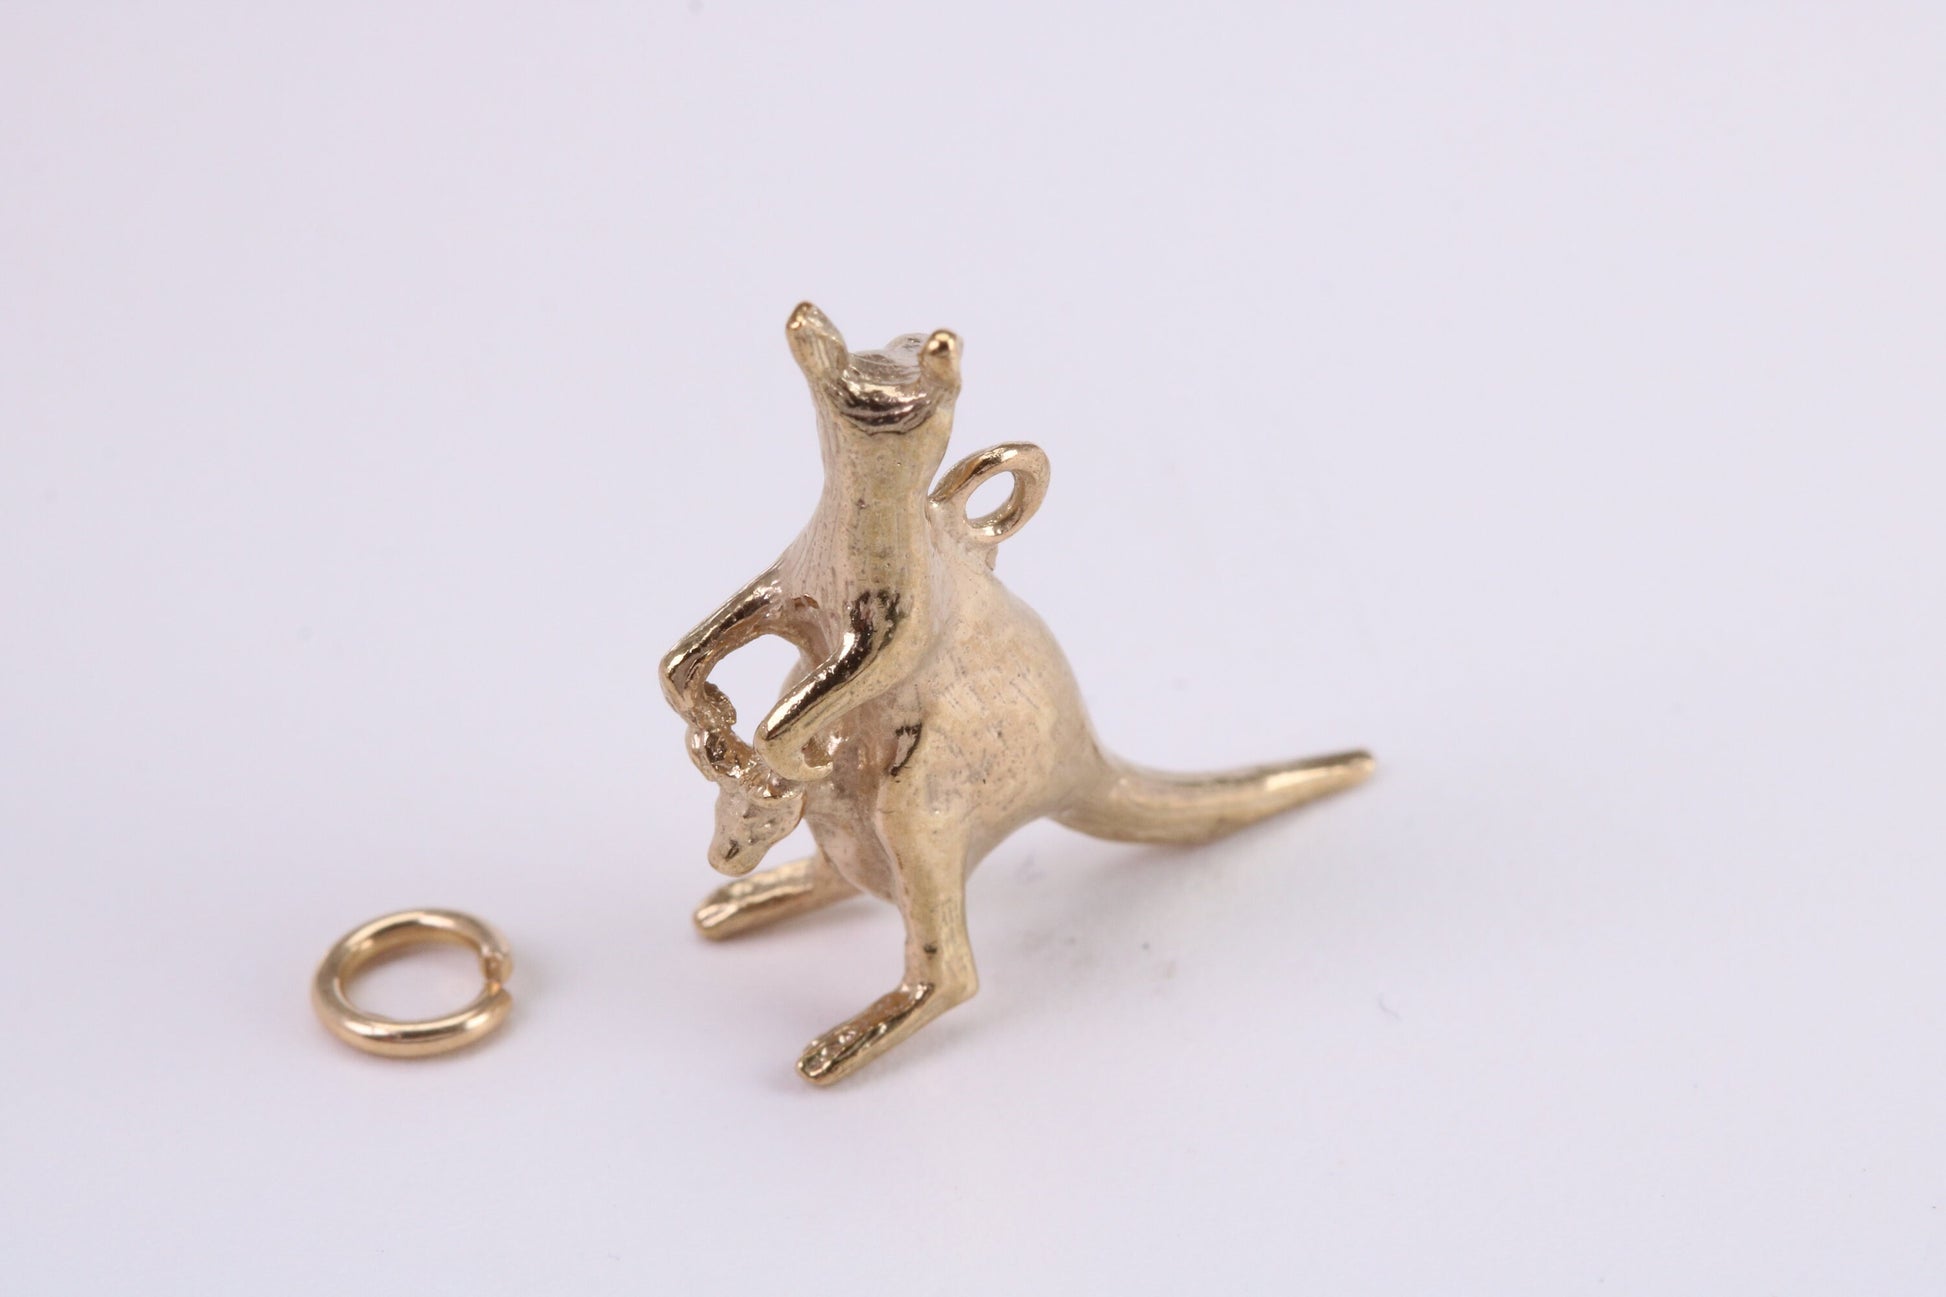 Kangaroo Charm, Traditional Charm, Made from Solid Yellow Gold, British Hallmarked, Complete with Attachment Link